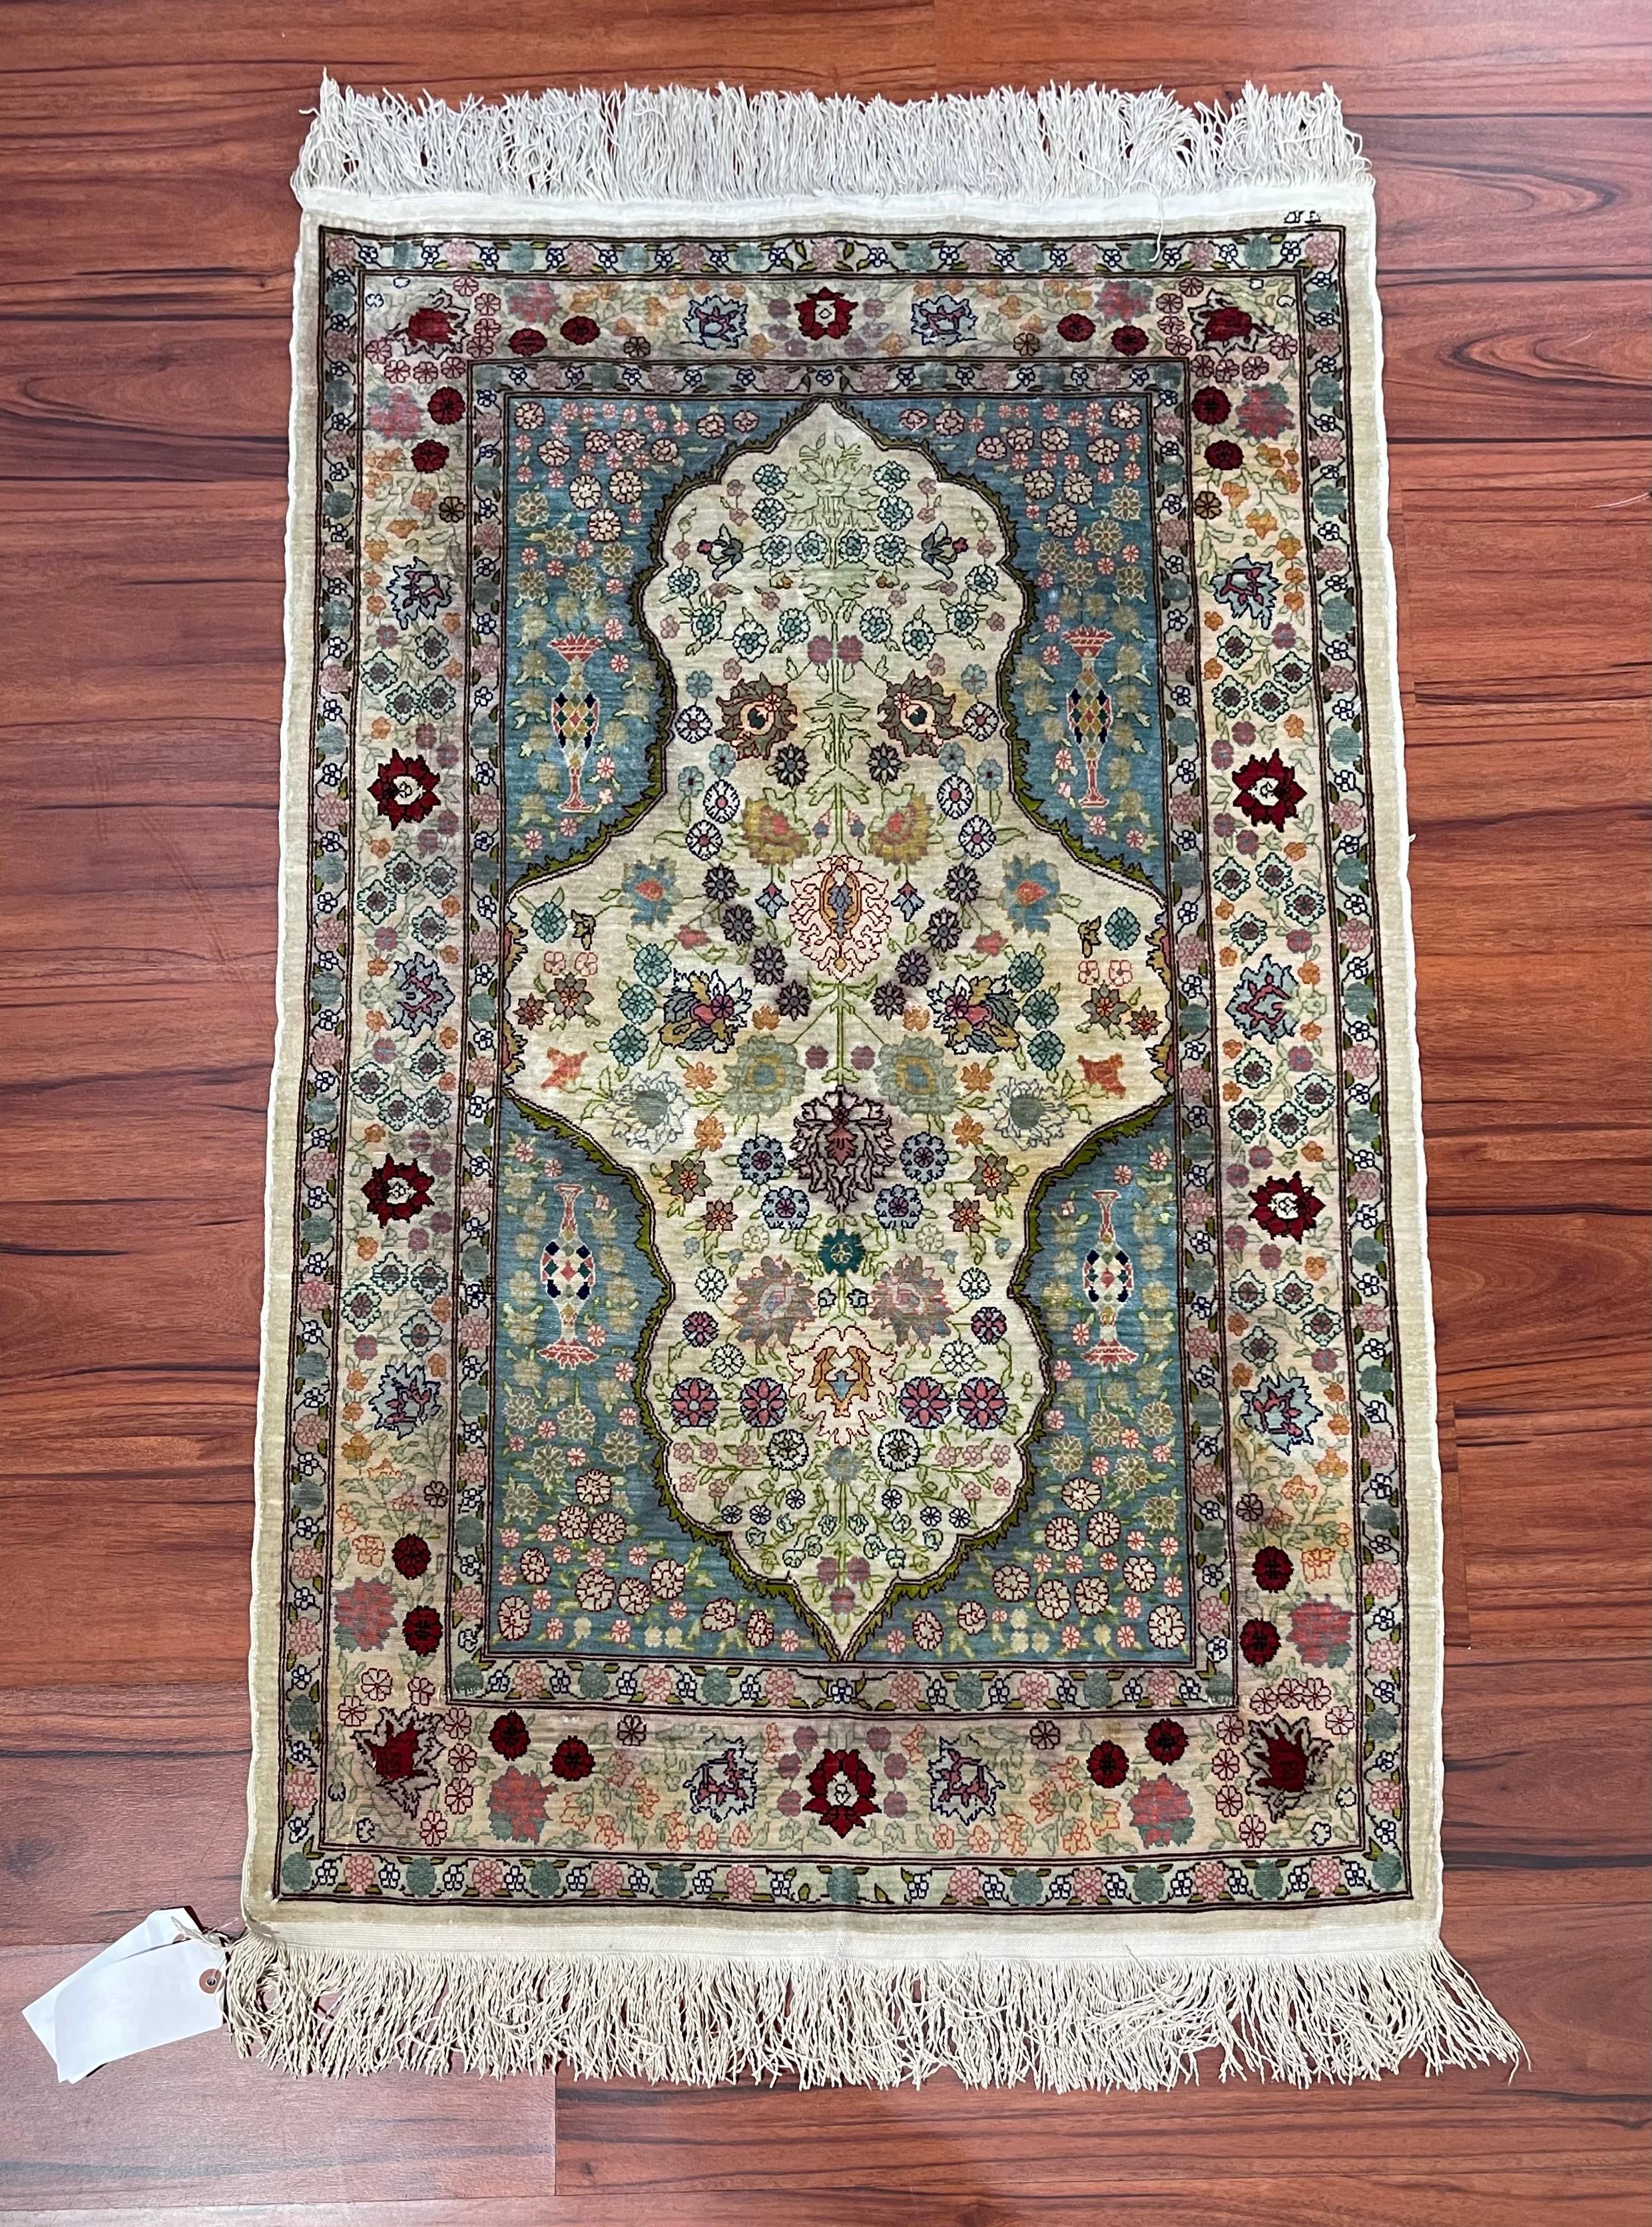 A stunning 100% silk Turkish Hereke Rug/Carpet that is in excellent condition. This piece originates from Turkey in the mid 20th century and is hand-knotted.